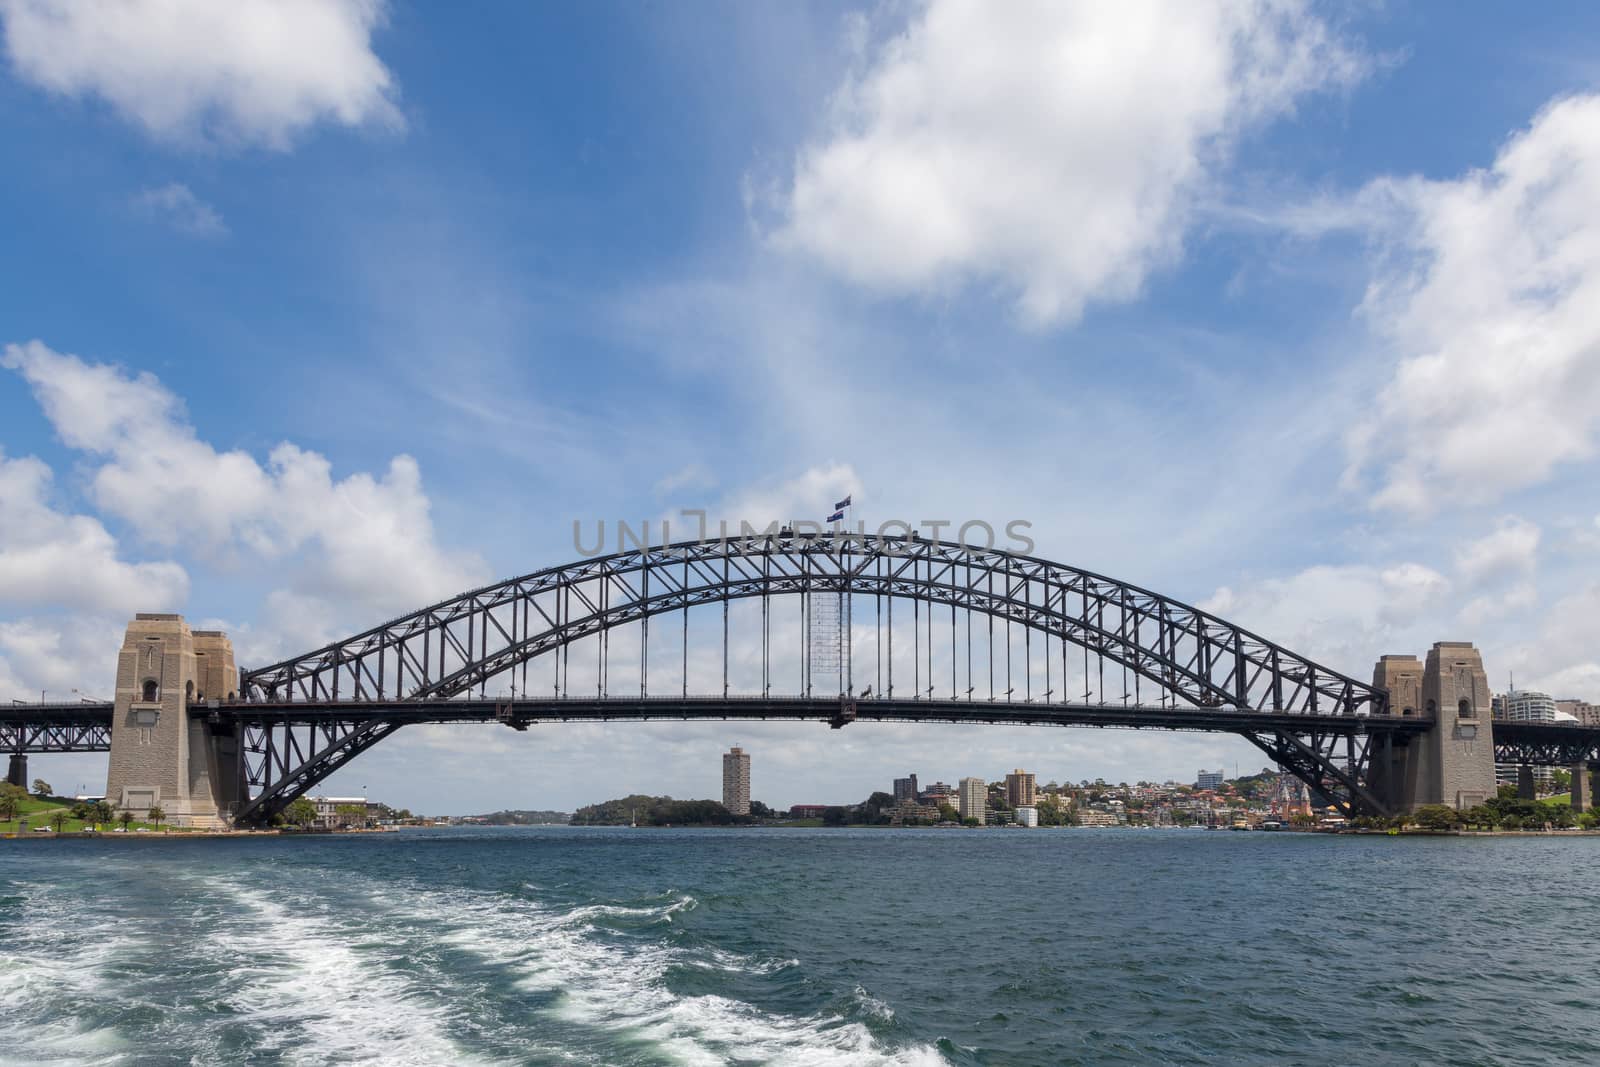 Sydney Harbour Bridge seen the water looking up at the bridge by kgboxford